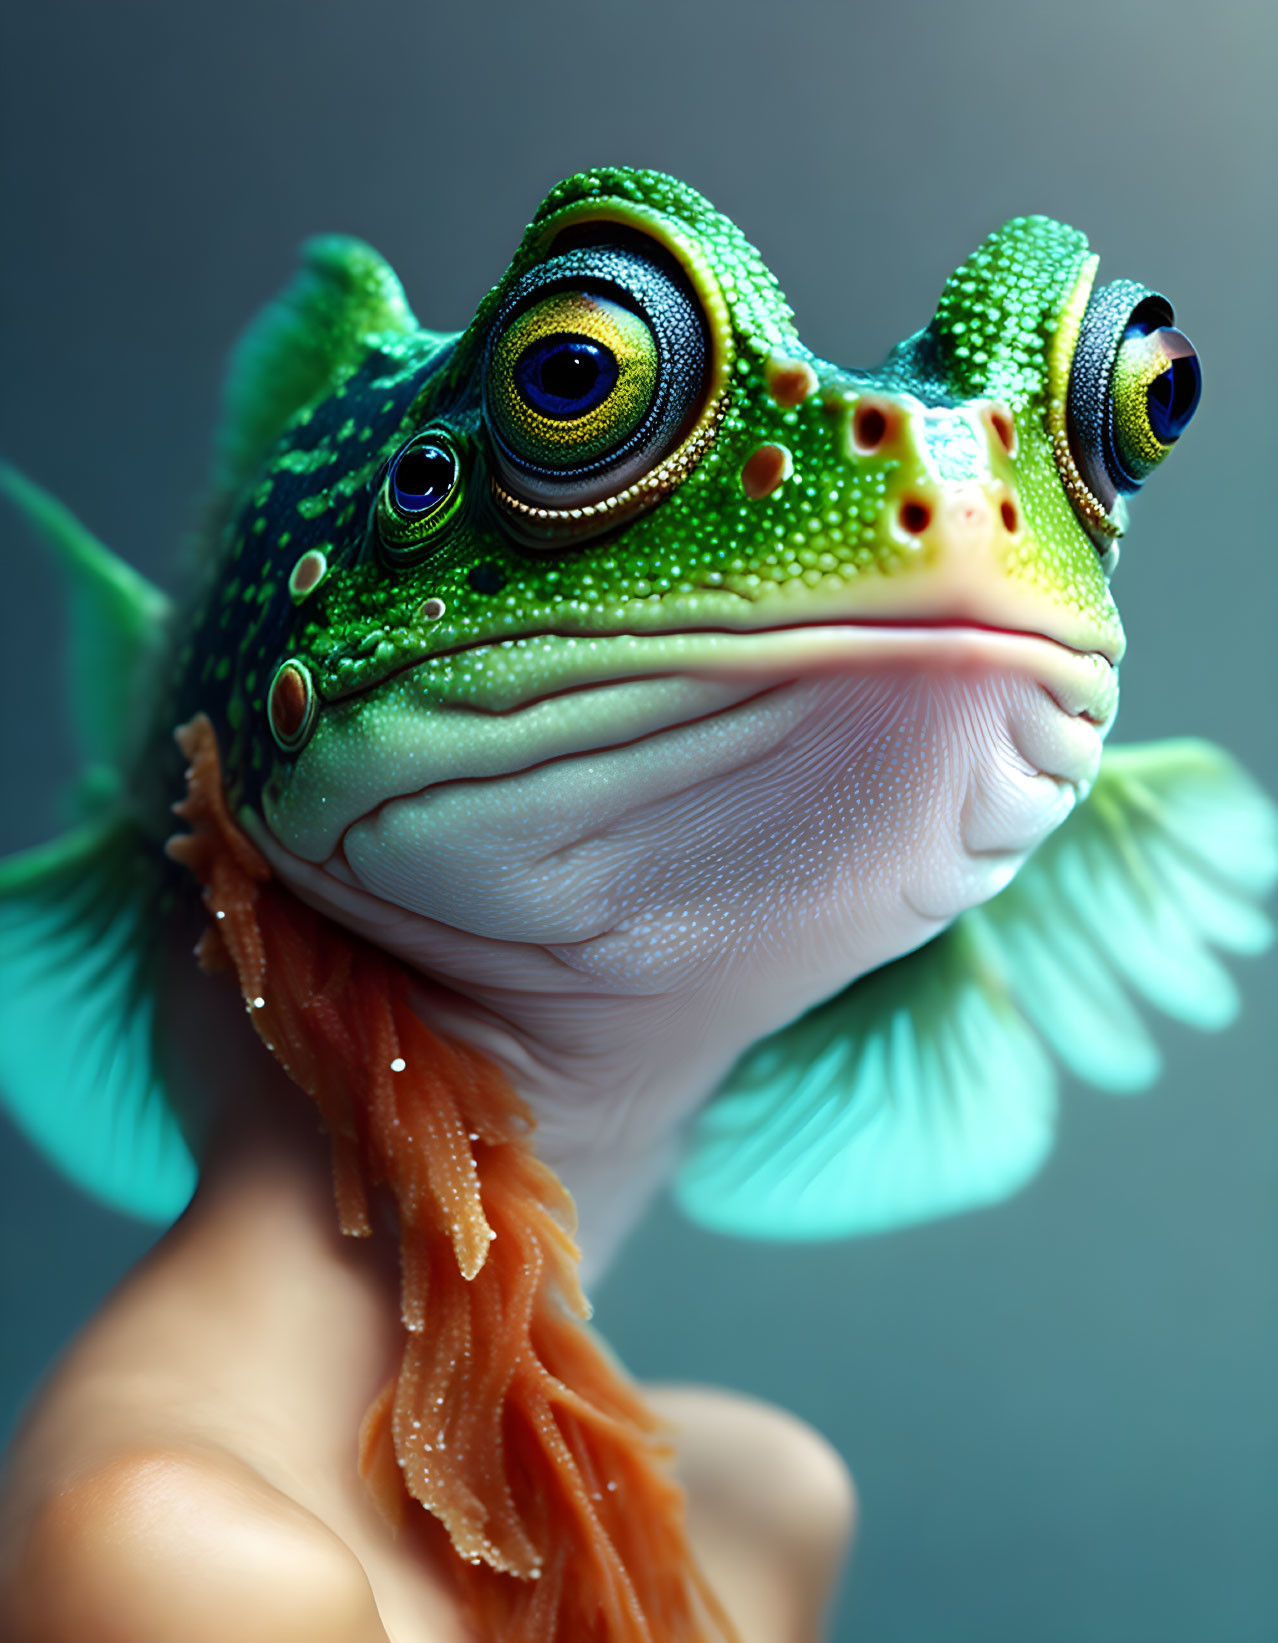 Colorful humanoid frog with swirling eyes and blue fins - Detailed Description